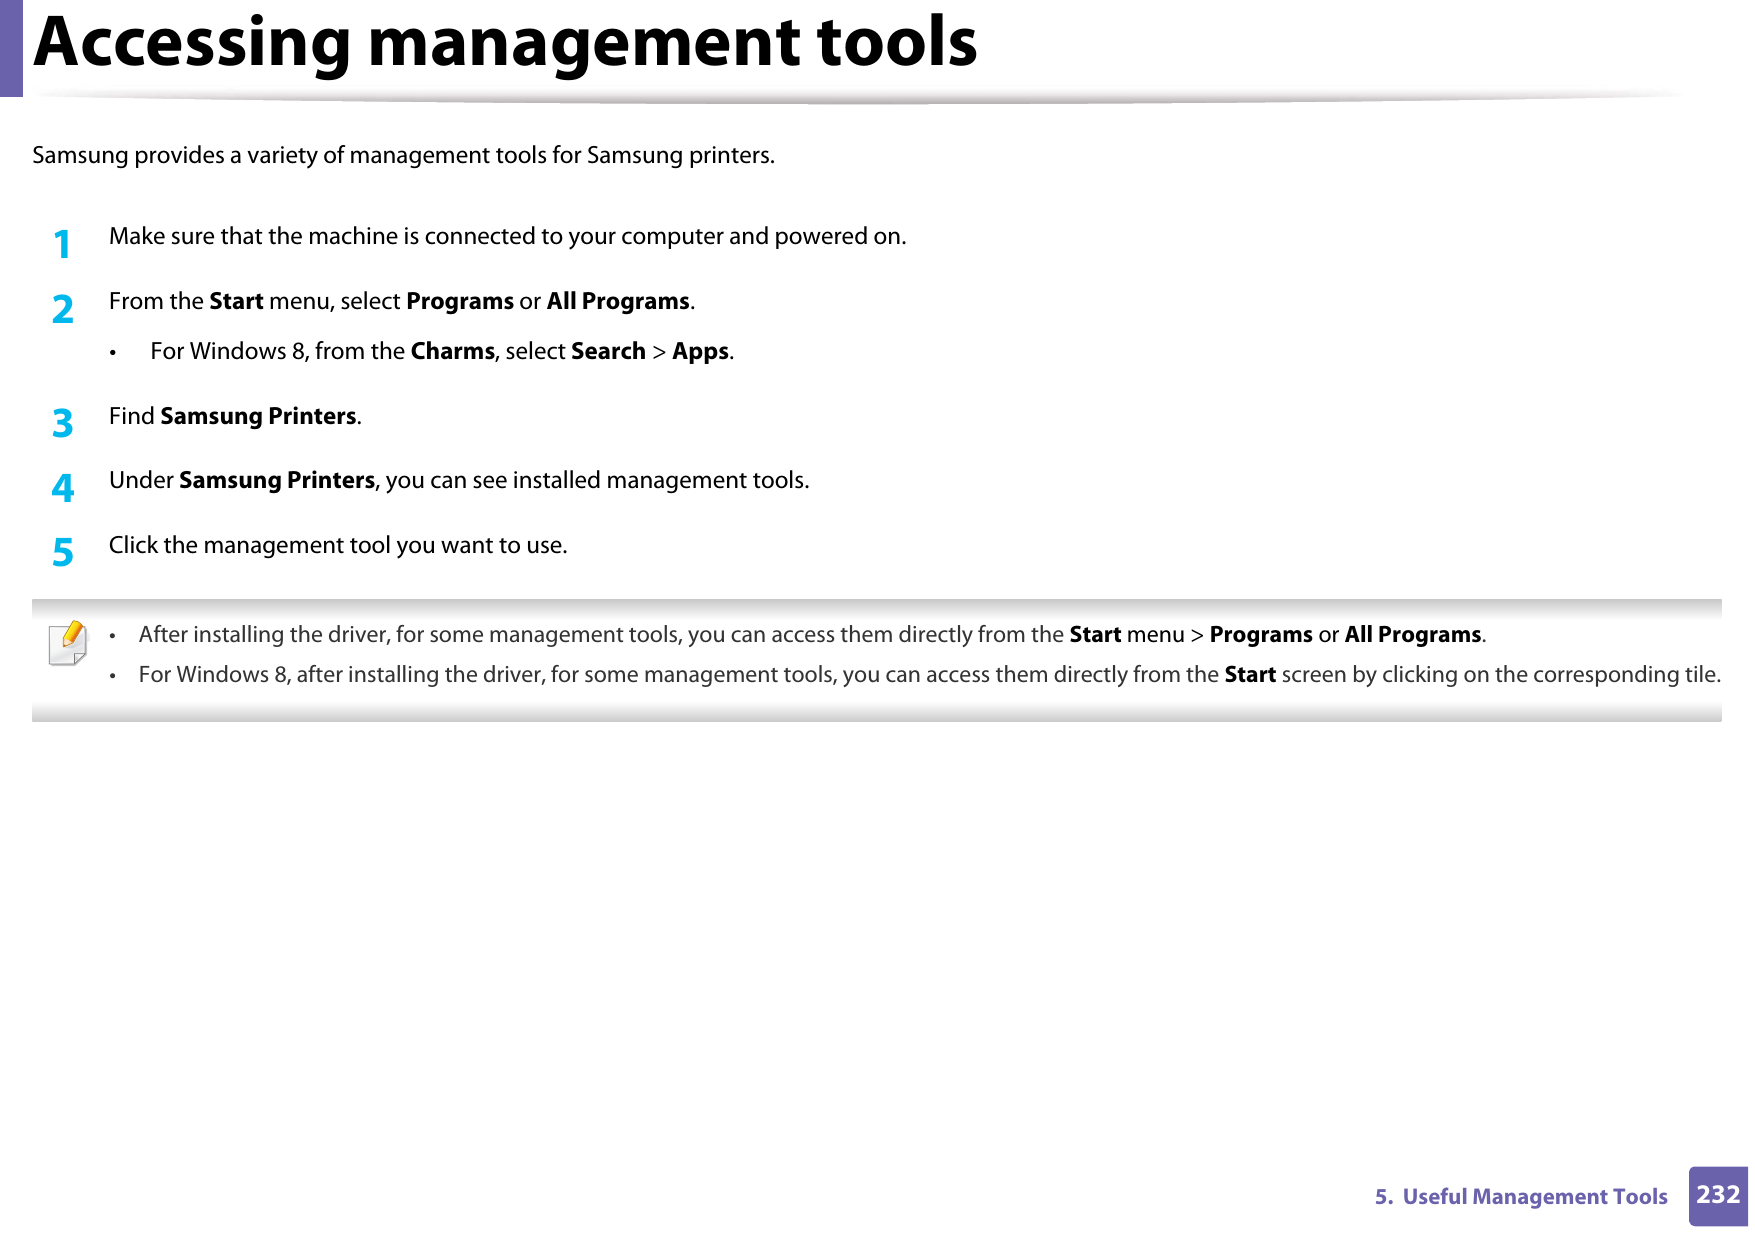 2325.  Useful Management ToolsAccessing management toolsSamsung provides a variety of management tools for Samsung printers. 1Make sure that the machine is connected to your computer and powered on.2  From the Start menu, select Programs or All Programs.• For Windows 8, from the Charms, select Search &gt; Apps.3  Find Samsung Printers.4  Under Samsung Printers, you can see installed management tools.5  Click the management tool you want to use. • After installing the driver, for some management tools, you can access them directly from the Start menu &gt; Programs or All Programs.• For Windows 8, after installing the driver, for some management tools, you can access them directly from the Start screen by clicking on the corresponding tile. 